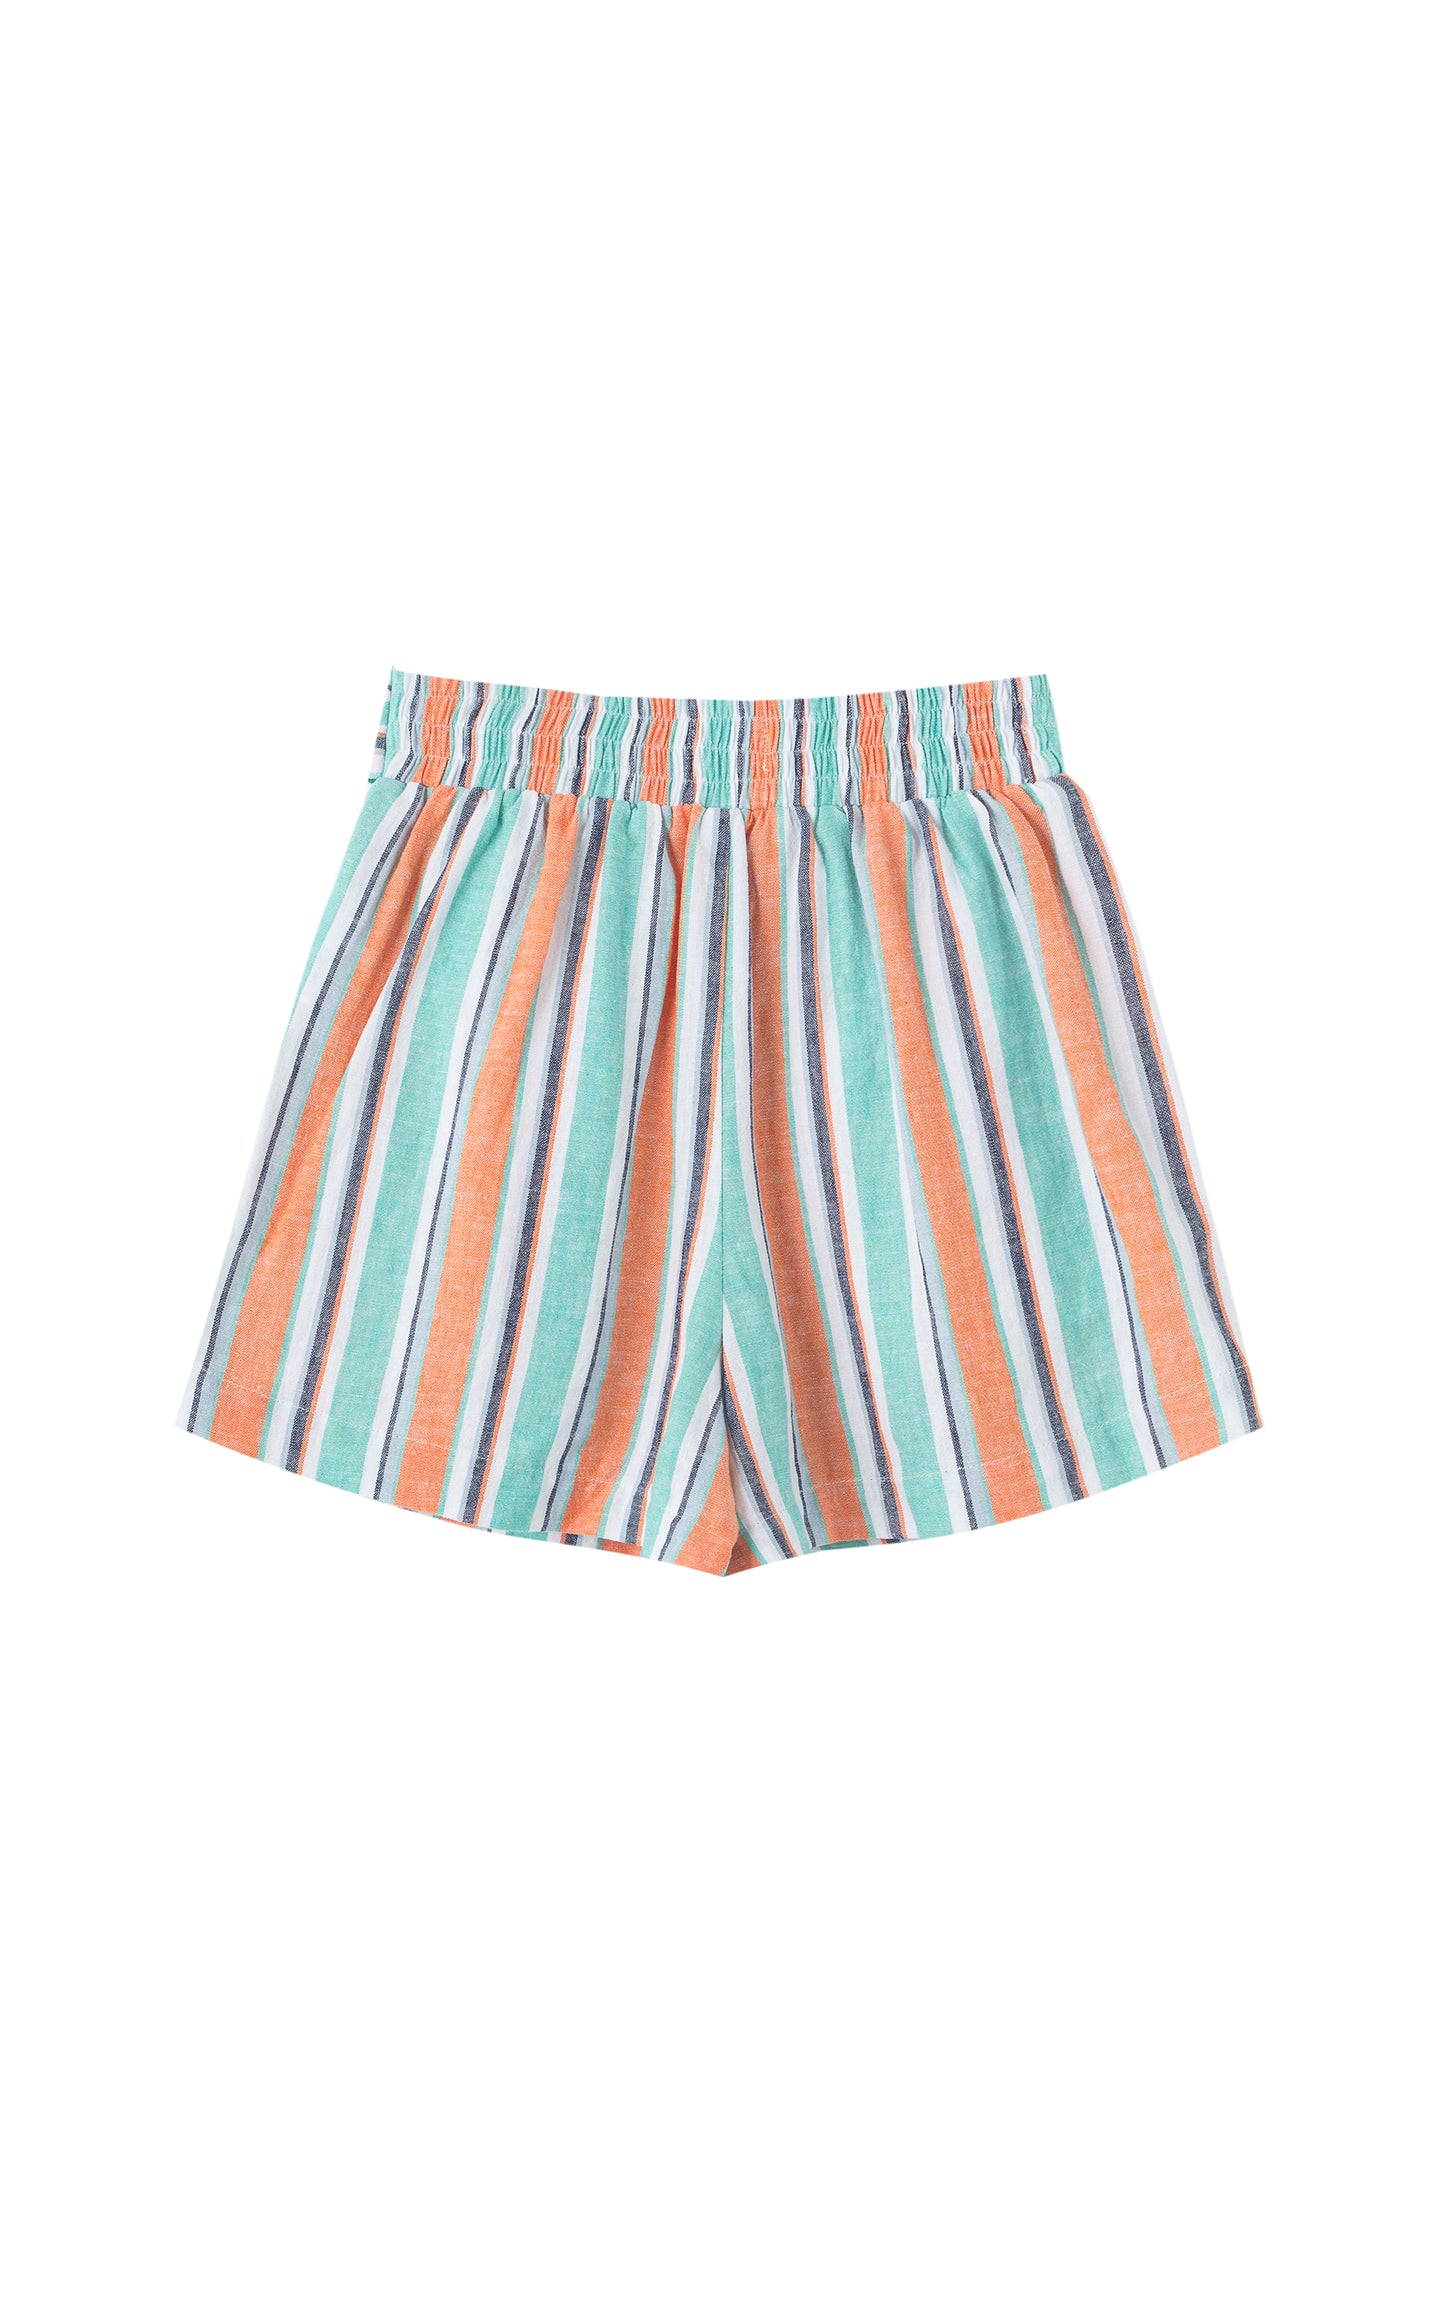 BACK OF ORANGE-GREEN-WHITE-AND-GREY-STRIPED SHORT WITH BOW